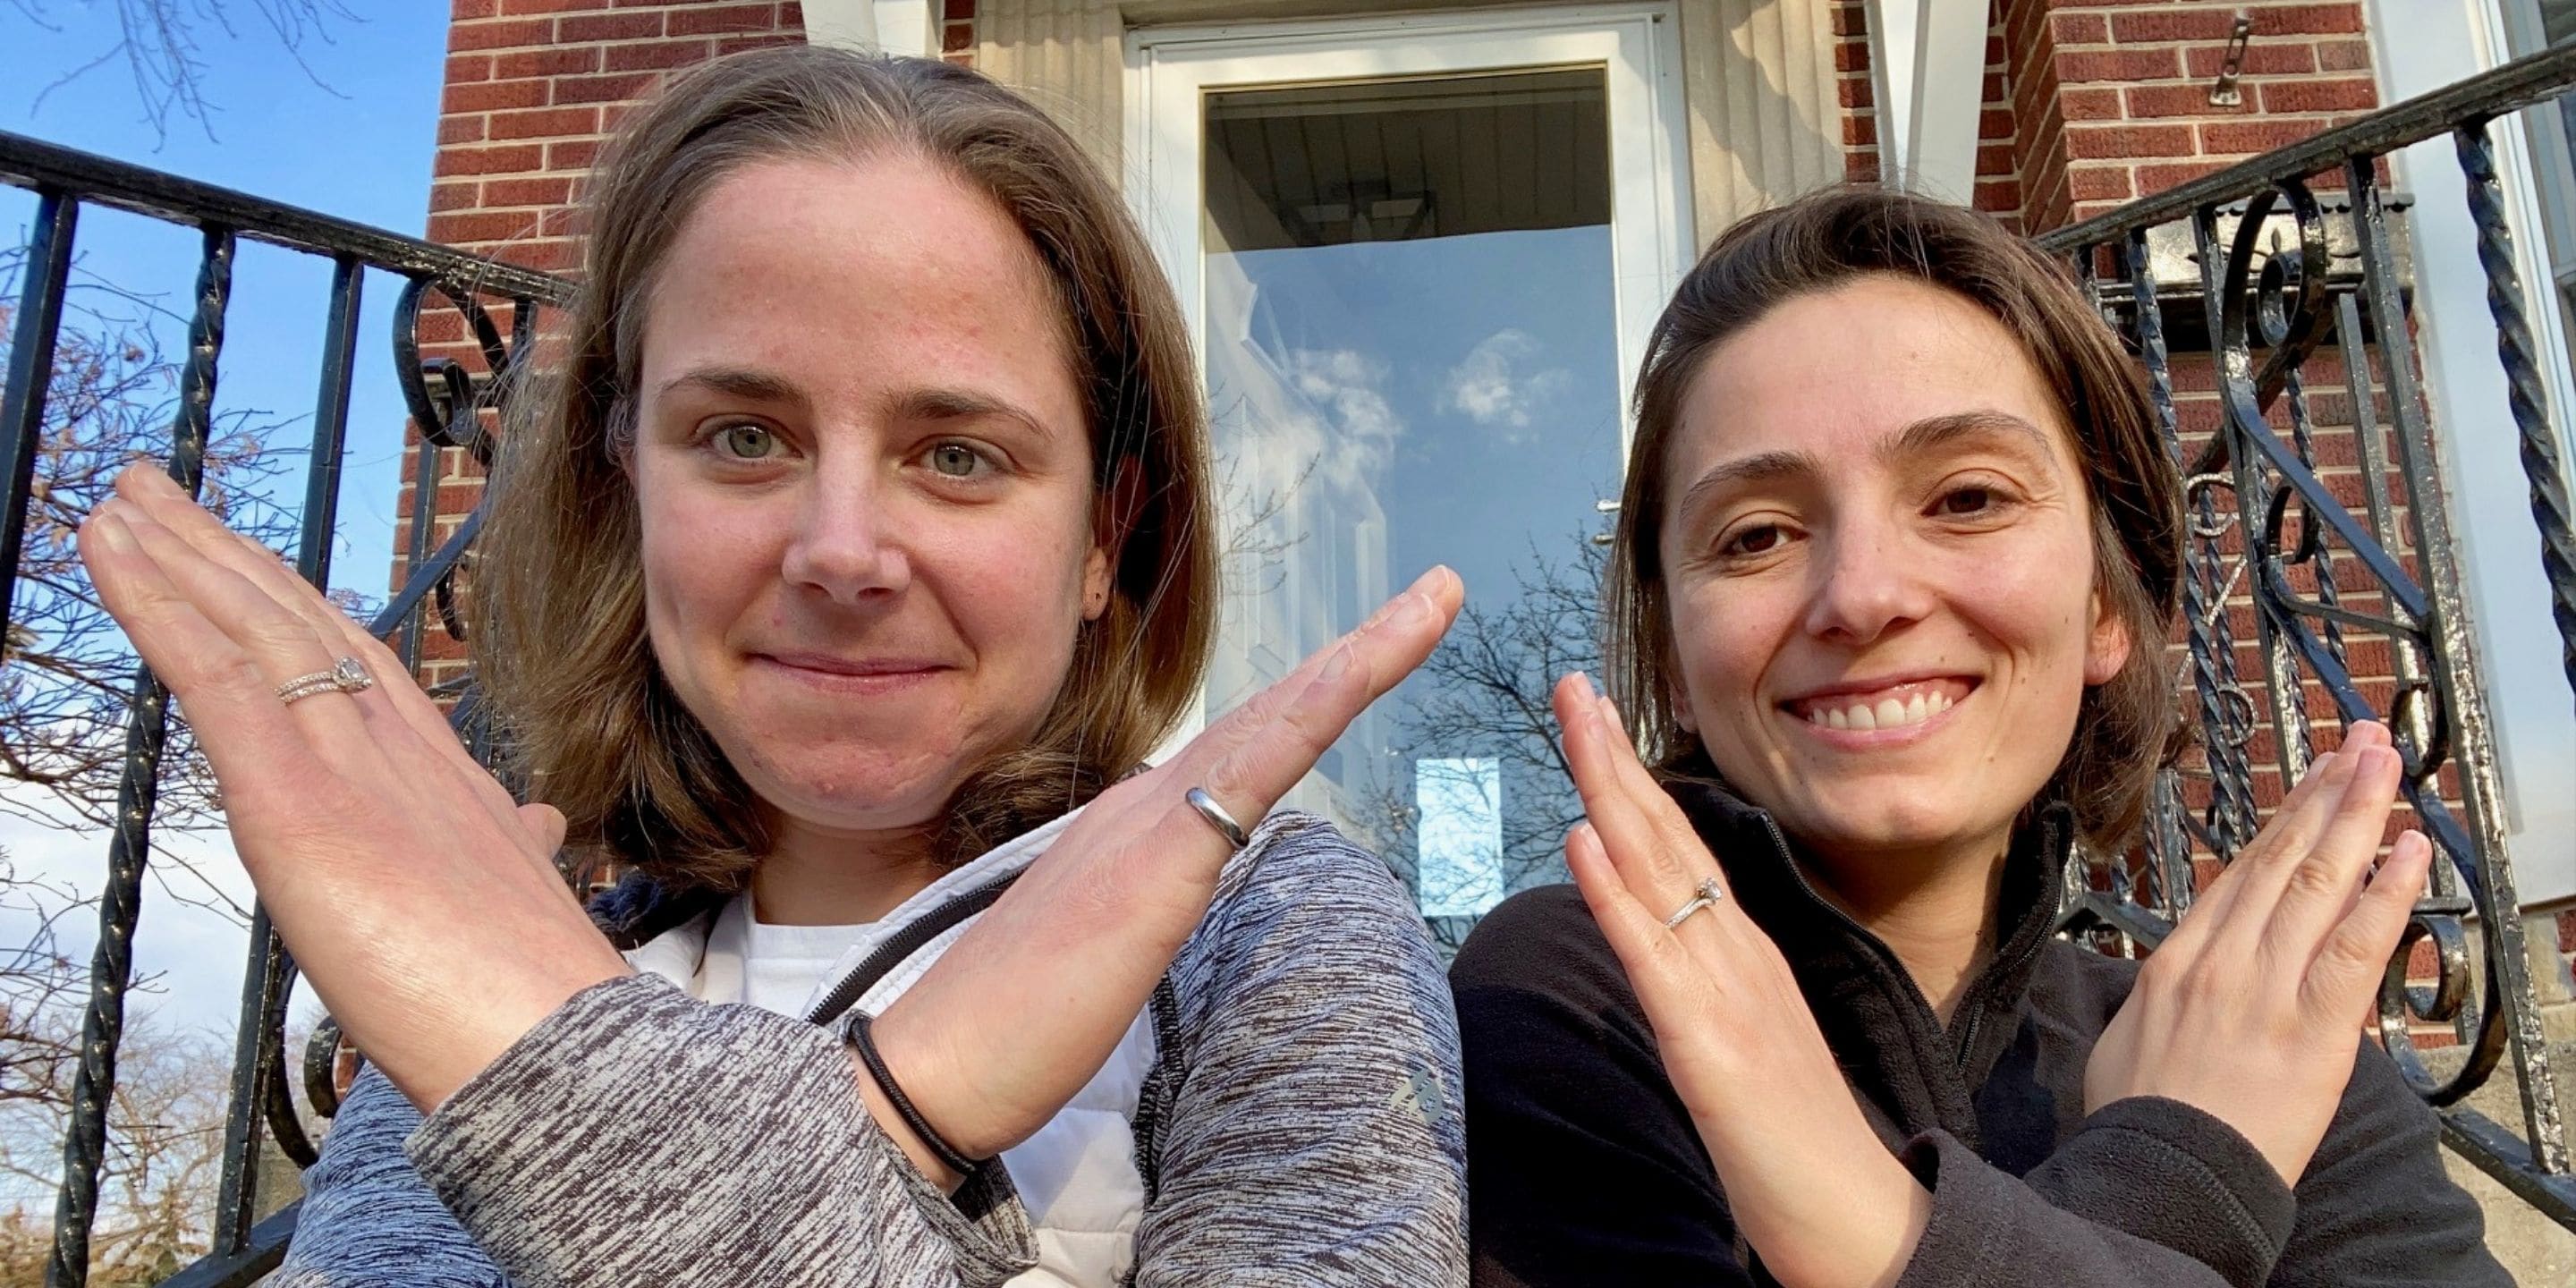 Beth Carter (left) and Helin Cox (right) pose with the International Women's Day #BreakTheBias symbol.